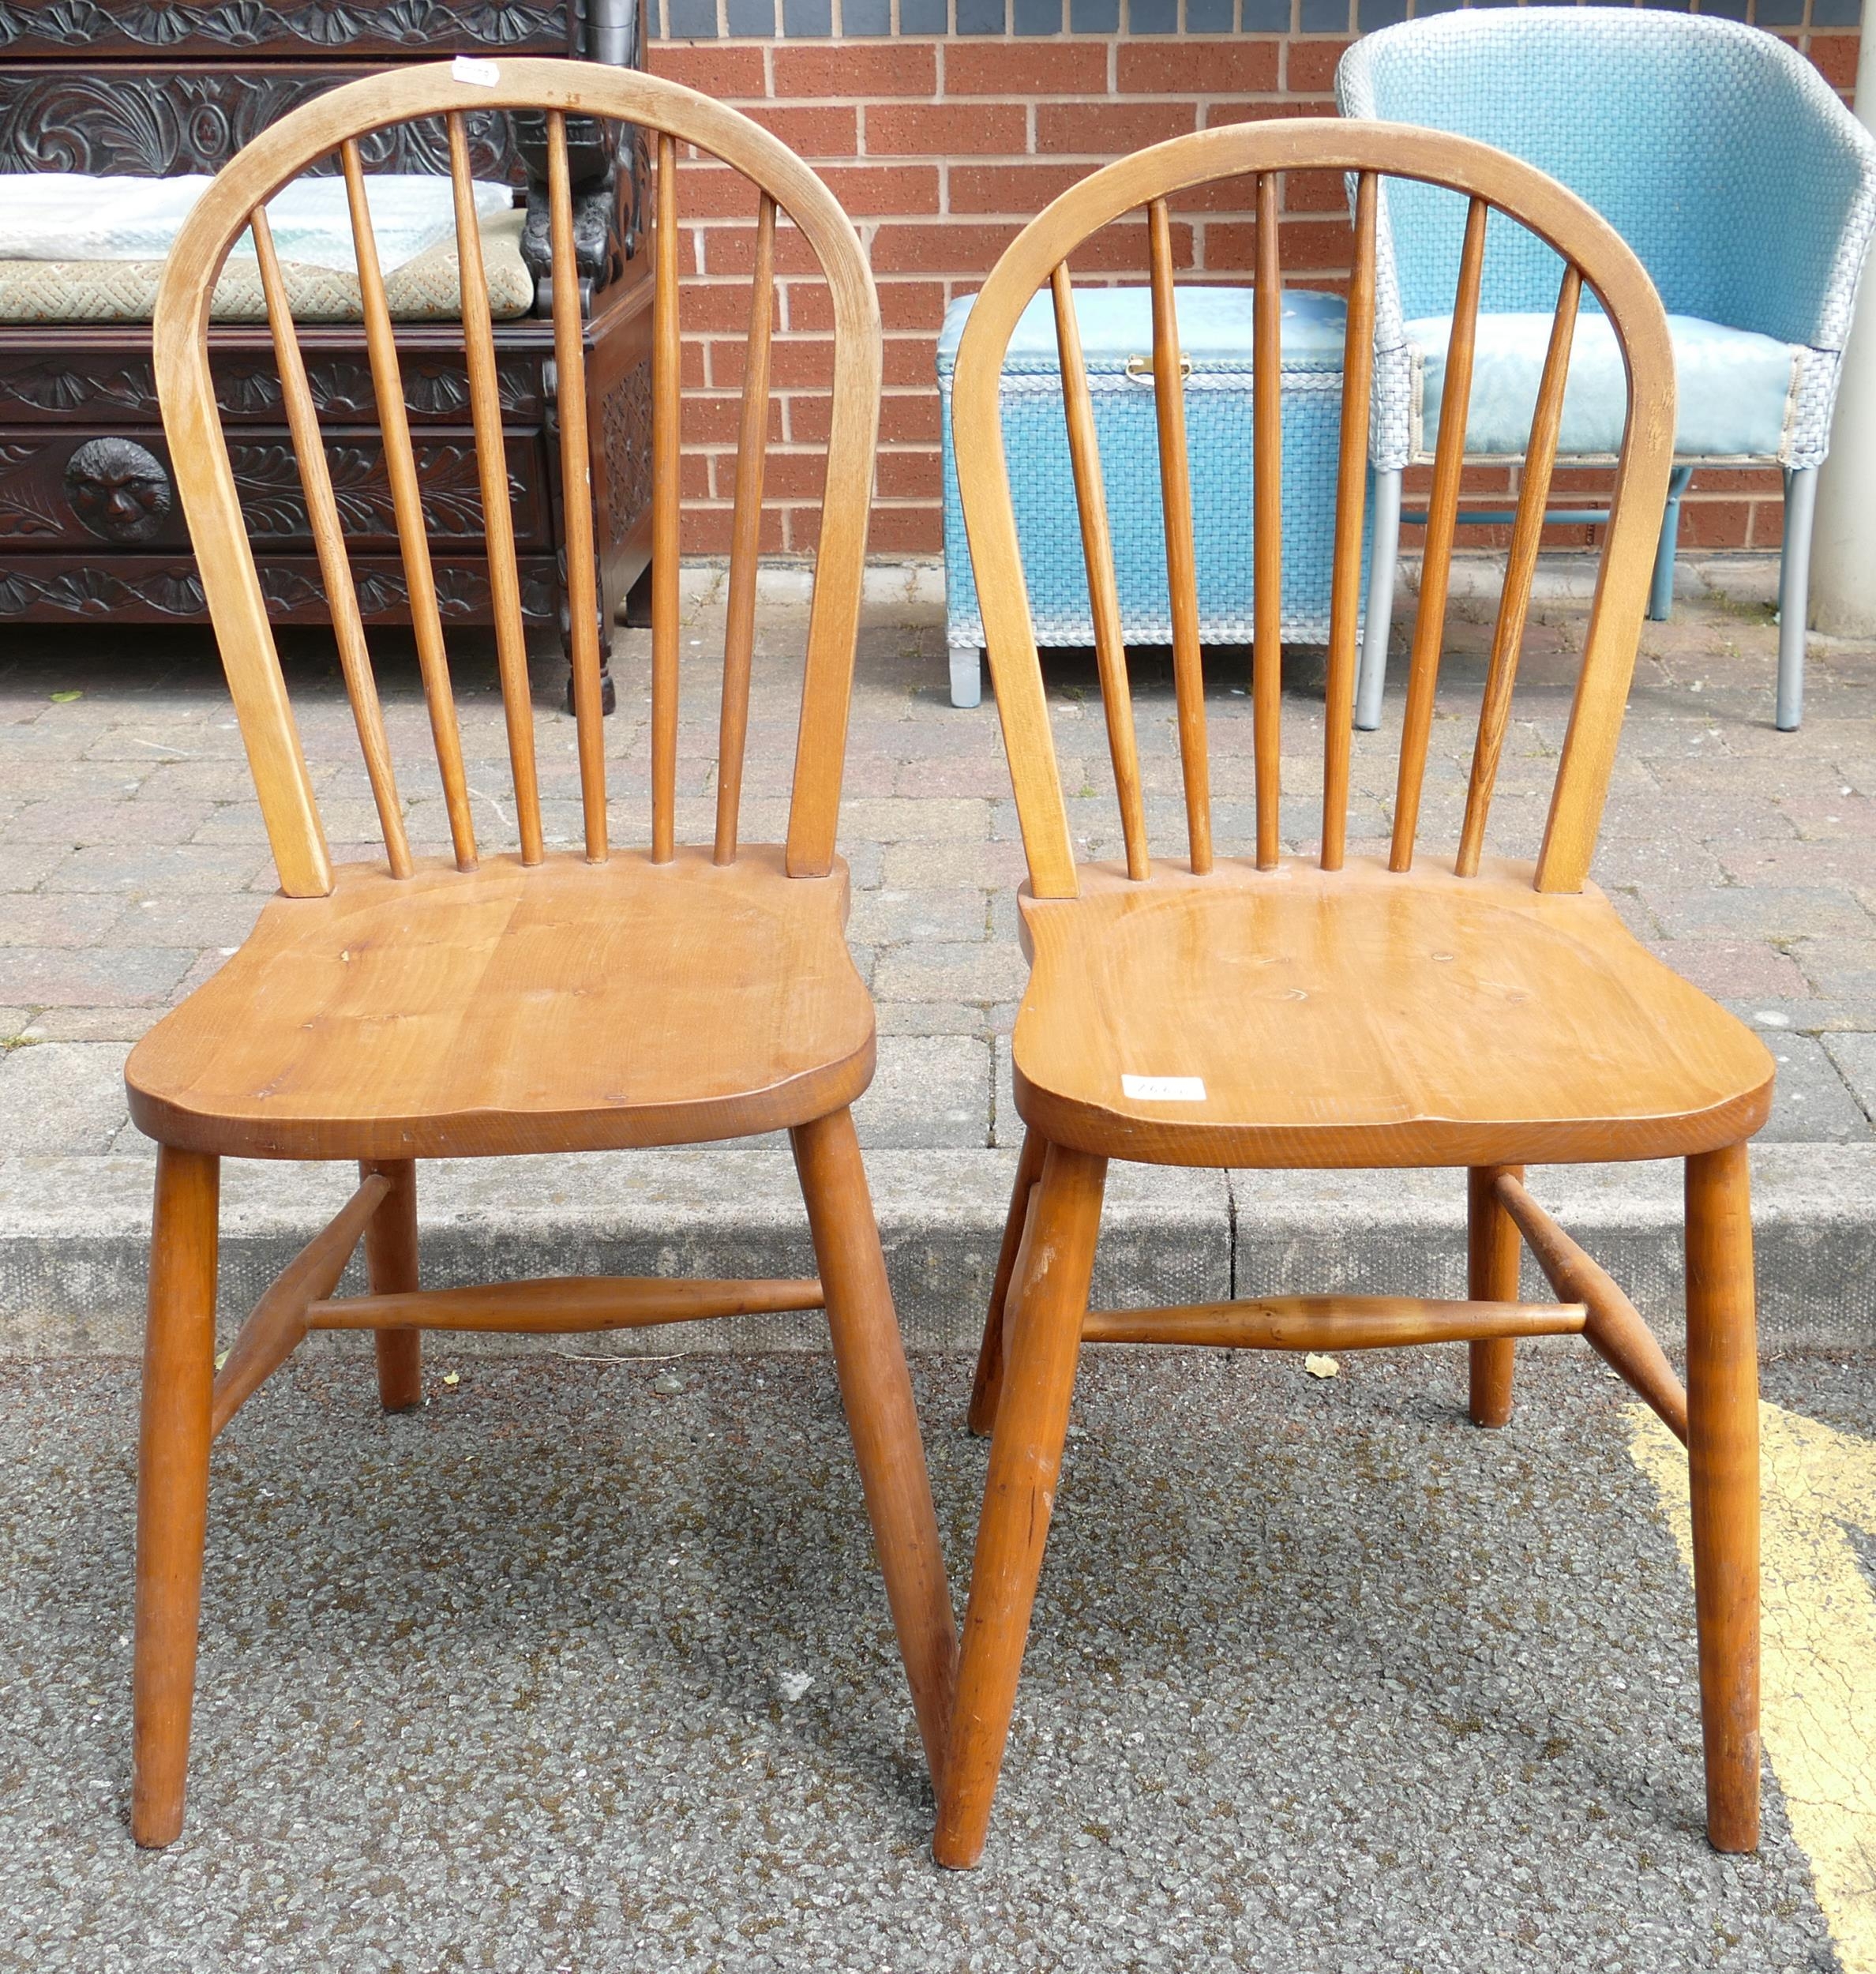 A pair of Ash Stick Back dining chairs 85cm High 37cm Wide